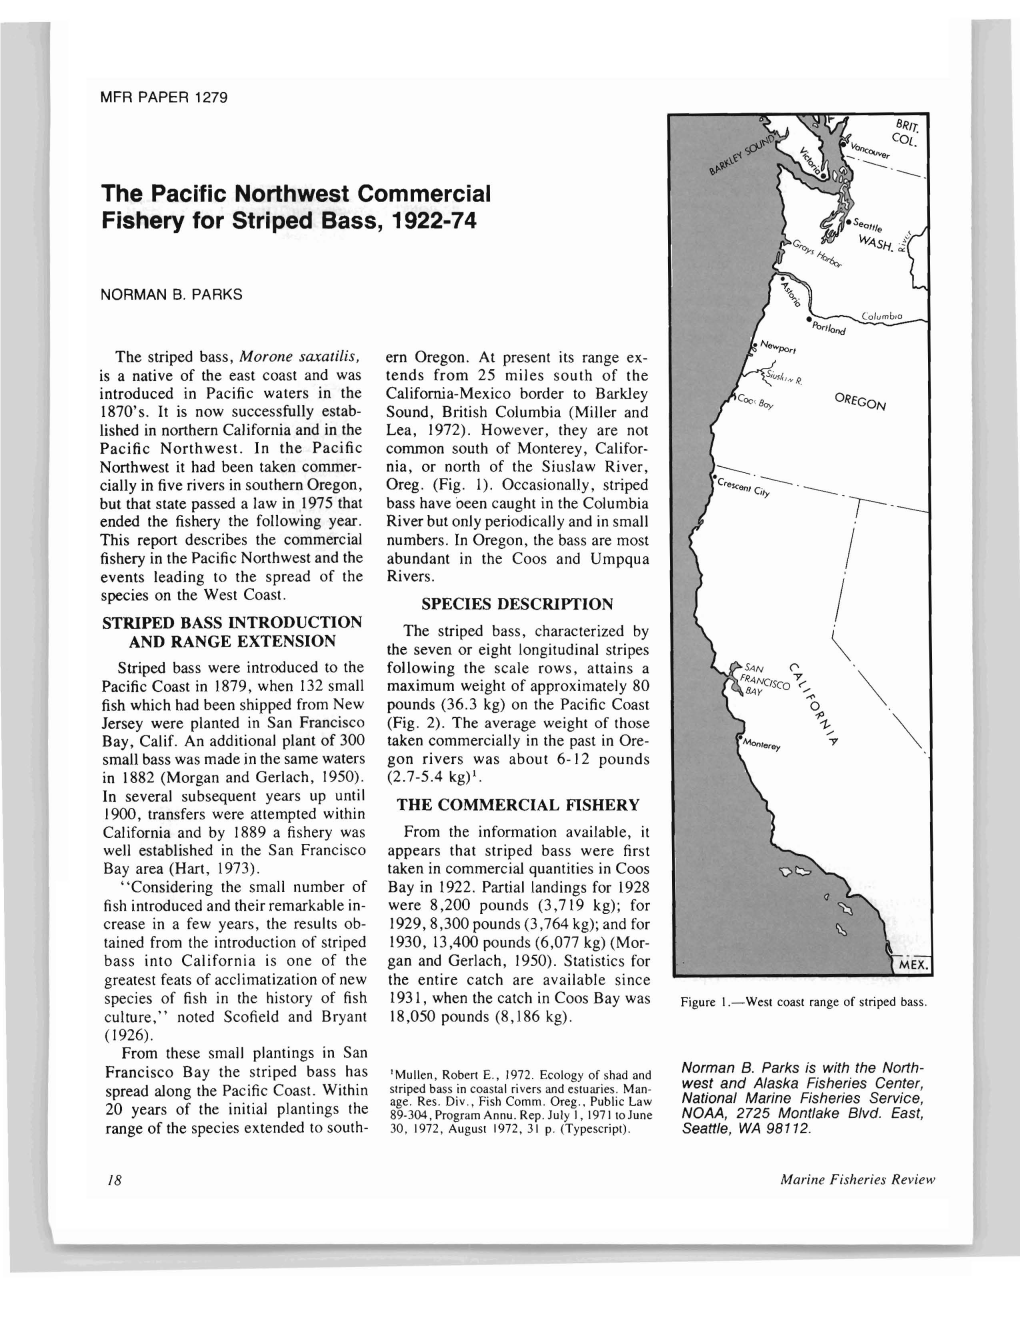 The Pacific Northwest Commercial Fishery for Striped Bass, 1922-74